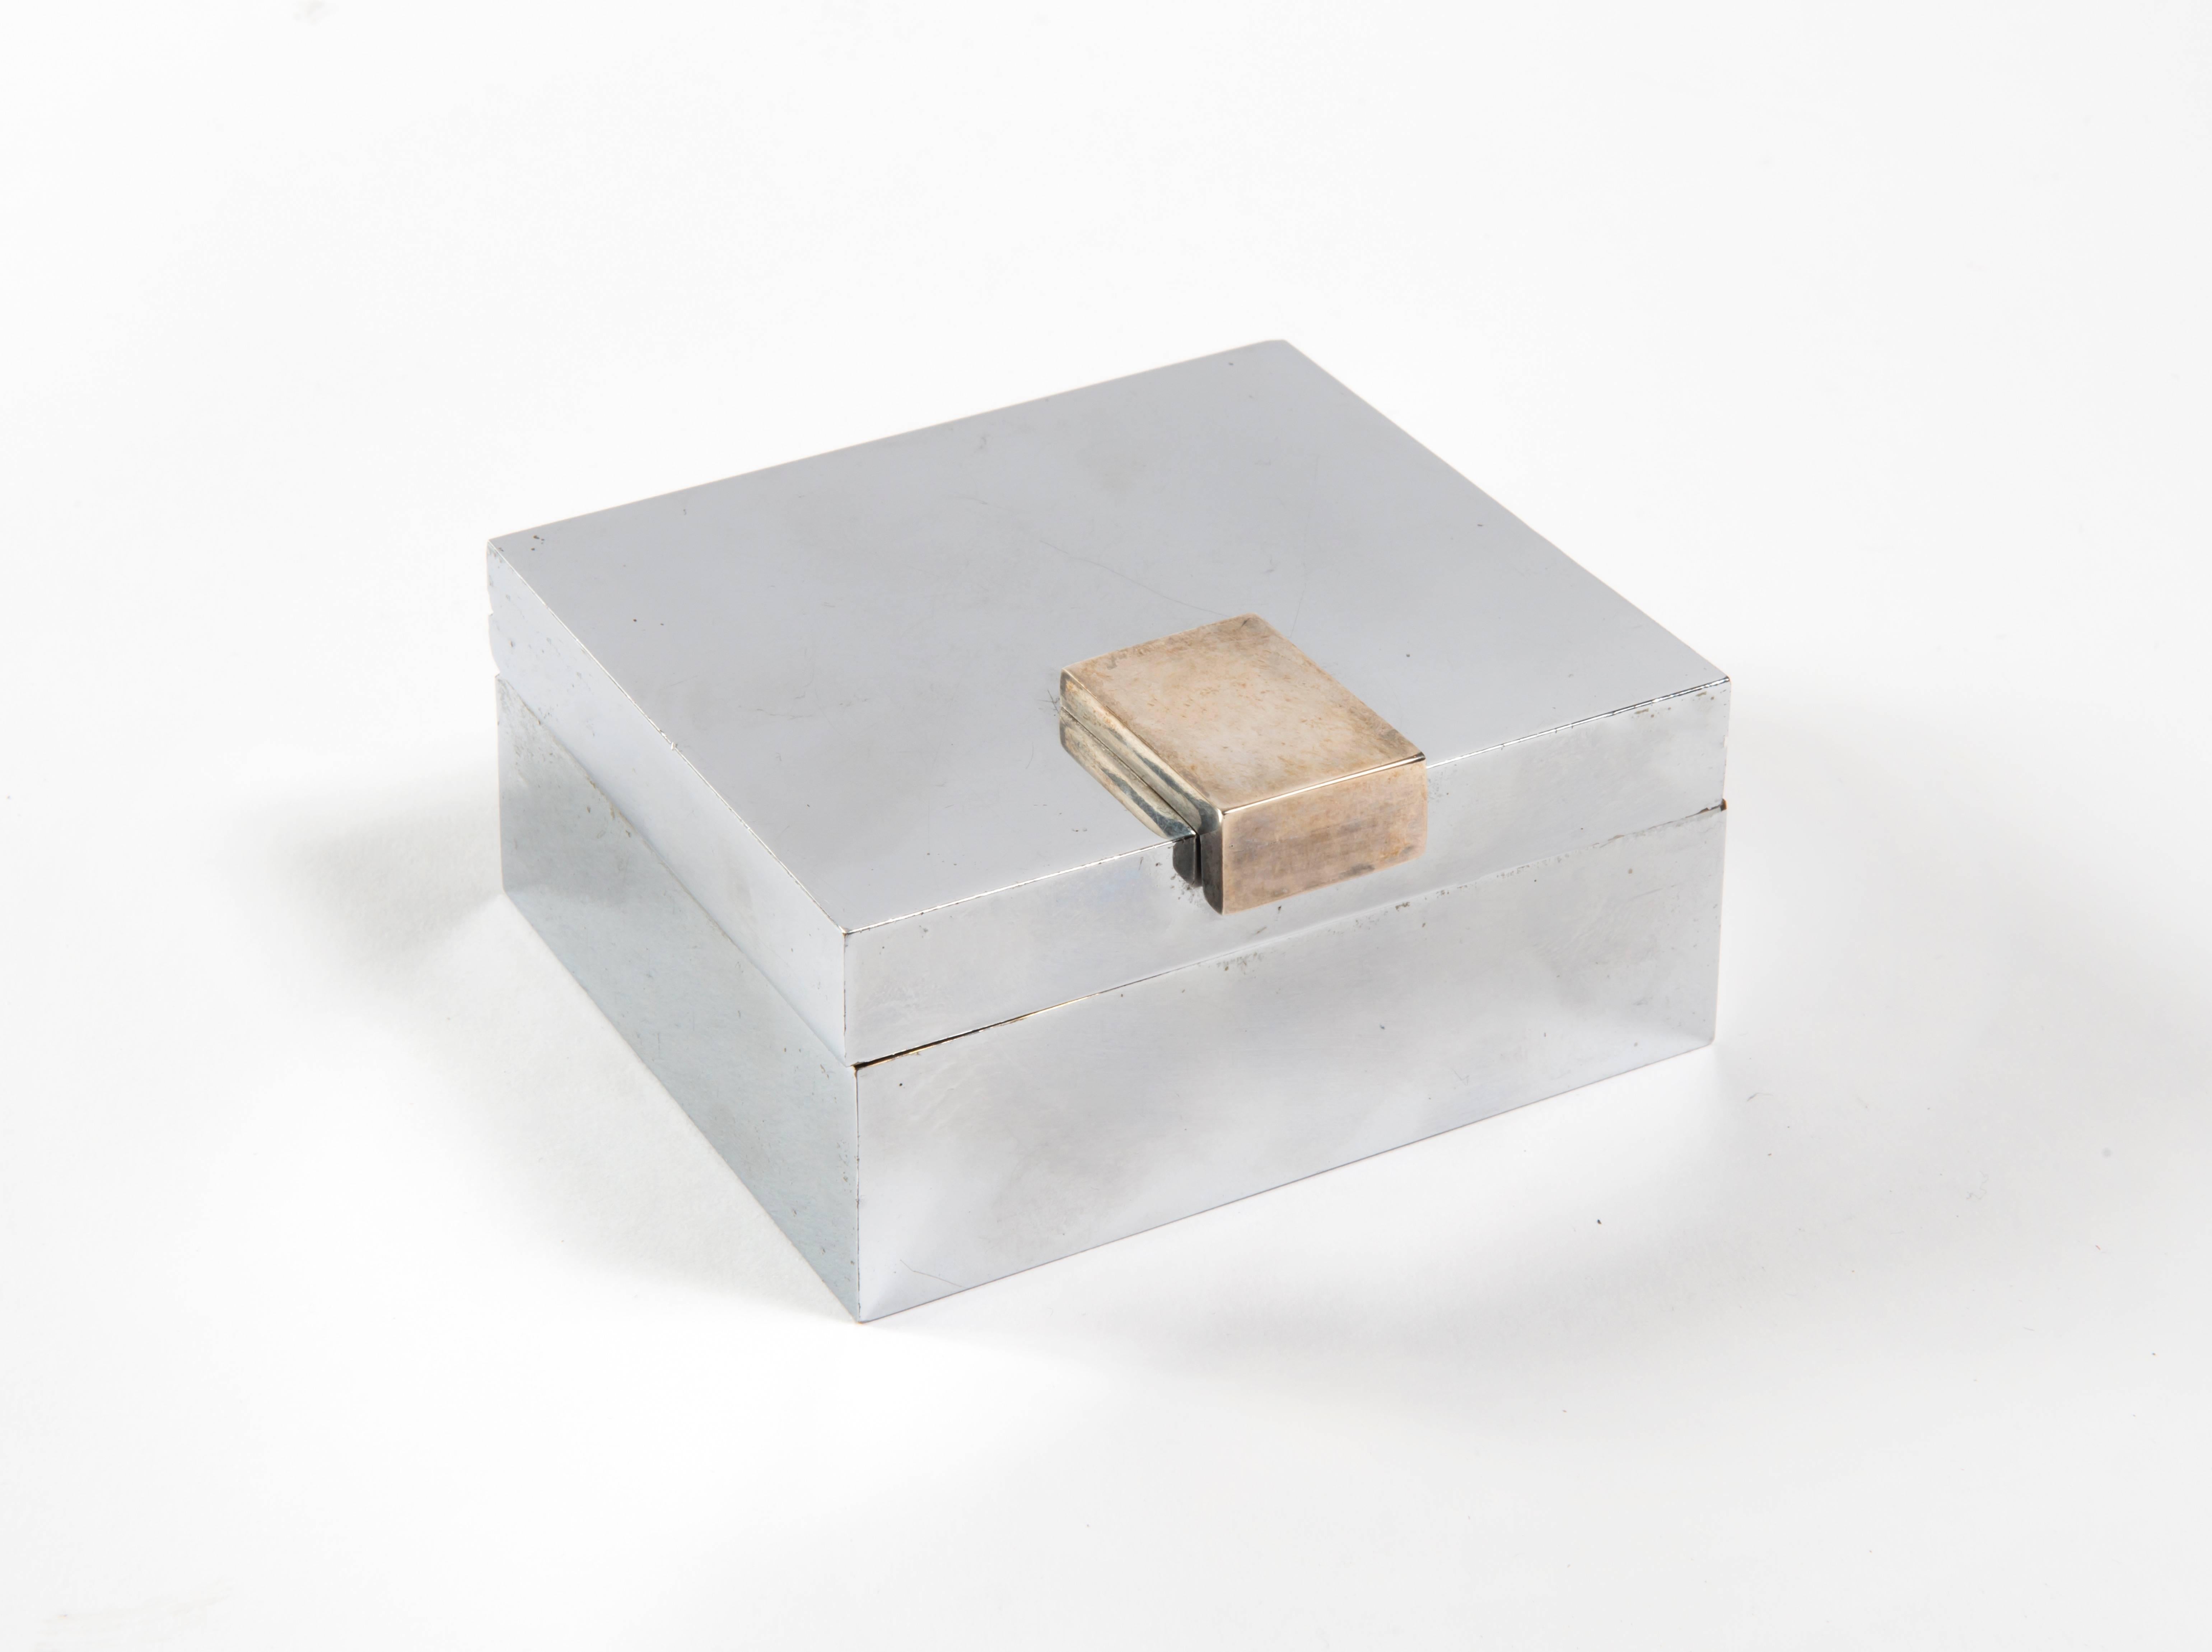 Box in silver nickel-plated metal. Underside stamped with 